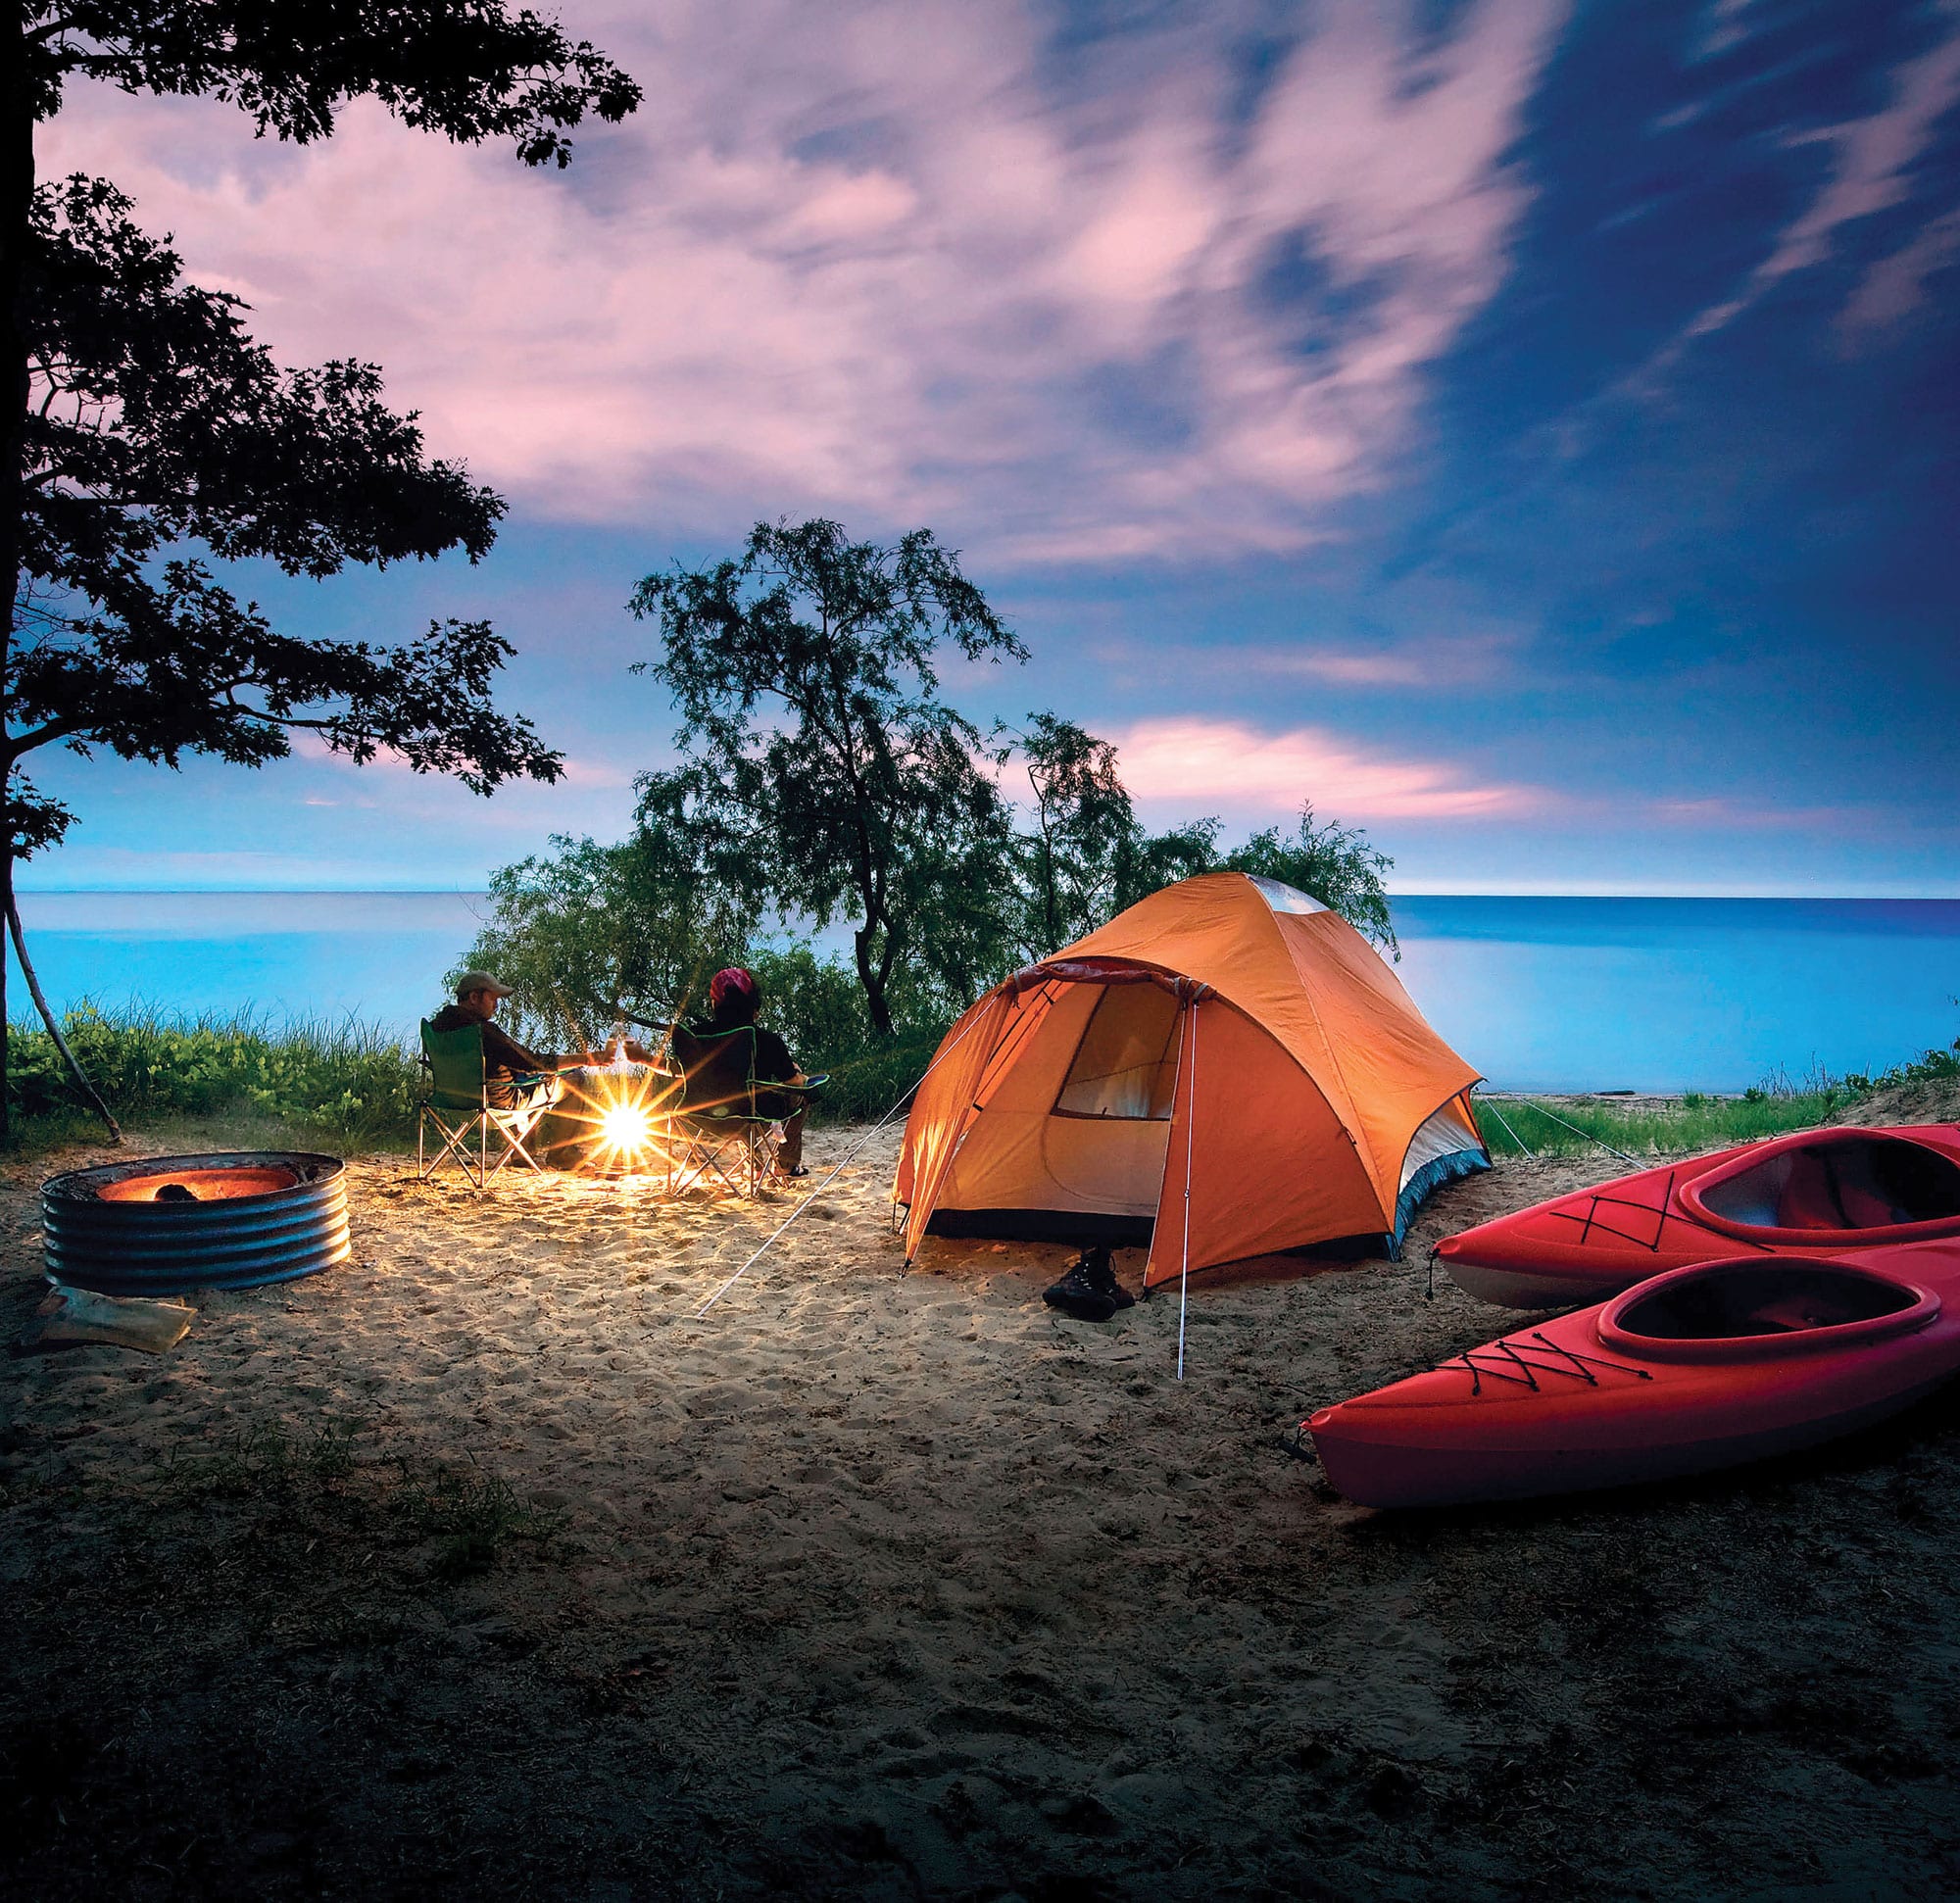 State camping and harbor reservations available through August